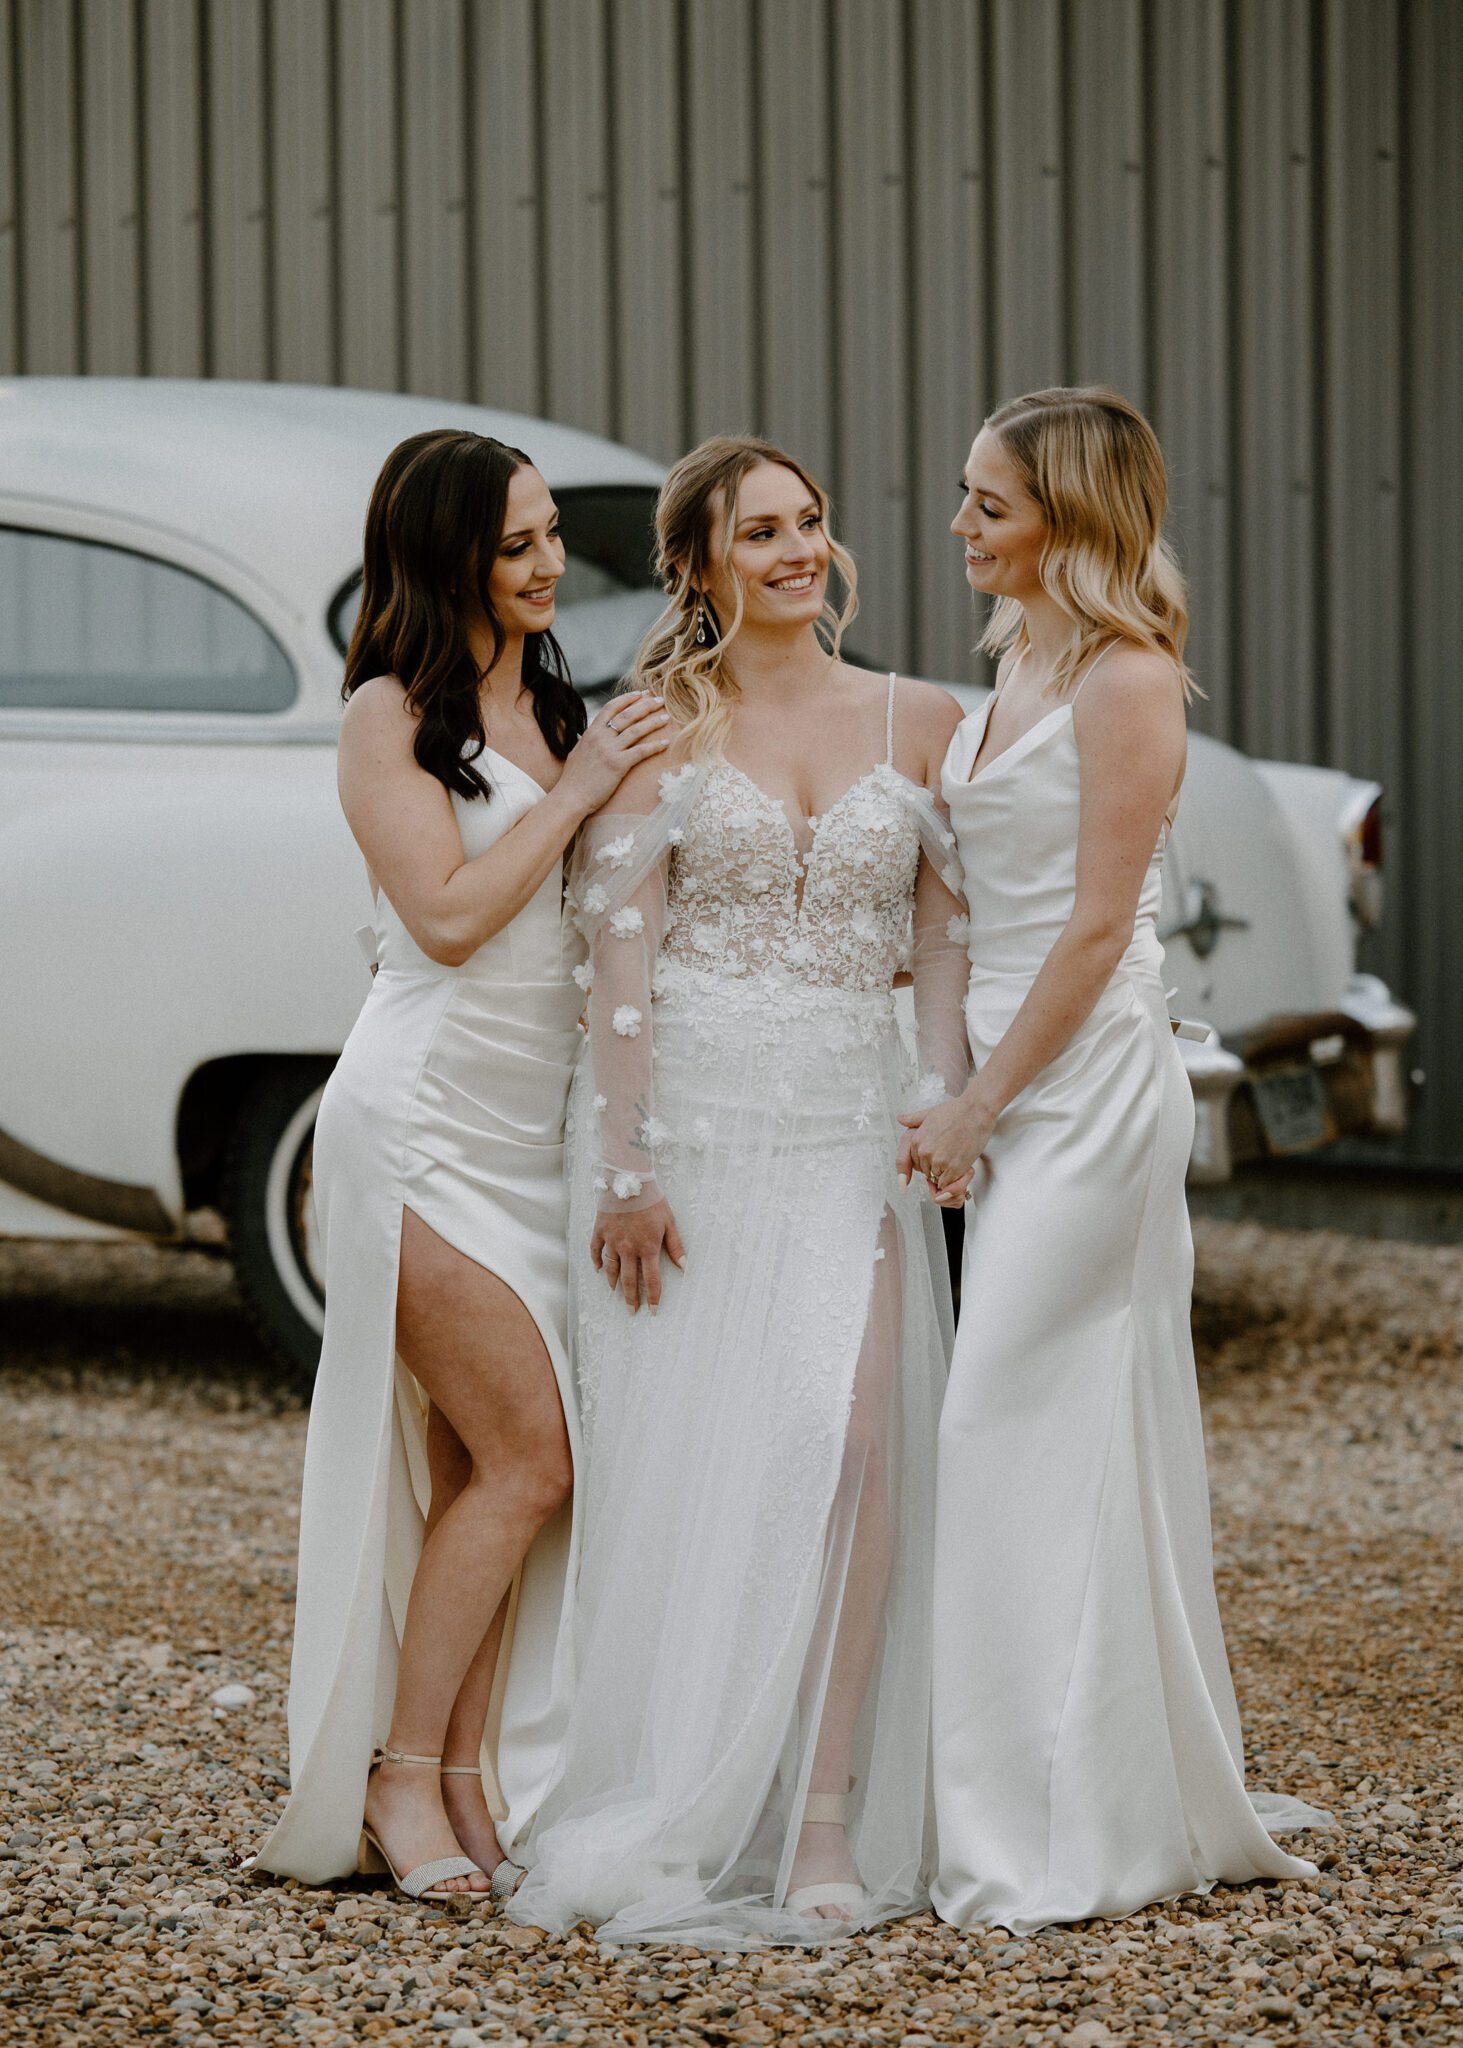 Bride and her bridesmaids standing in front of cream-coloured vintage getaway car, in white gowns, warm and moody wedding inspiration at the 52 North Venue.